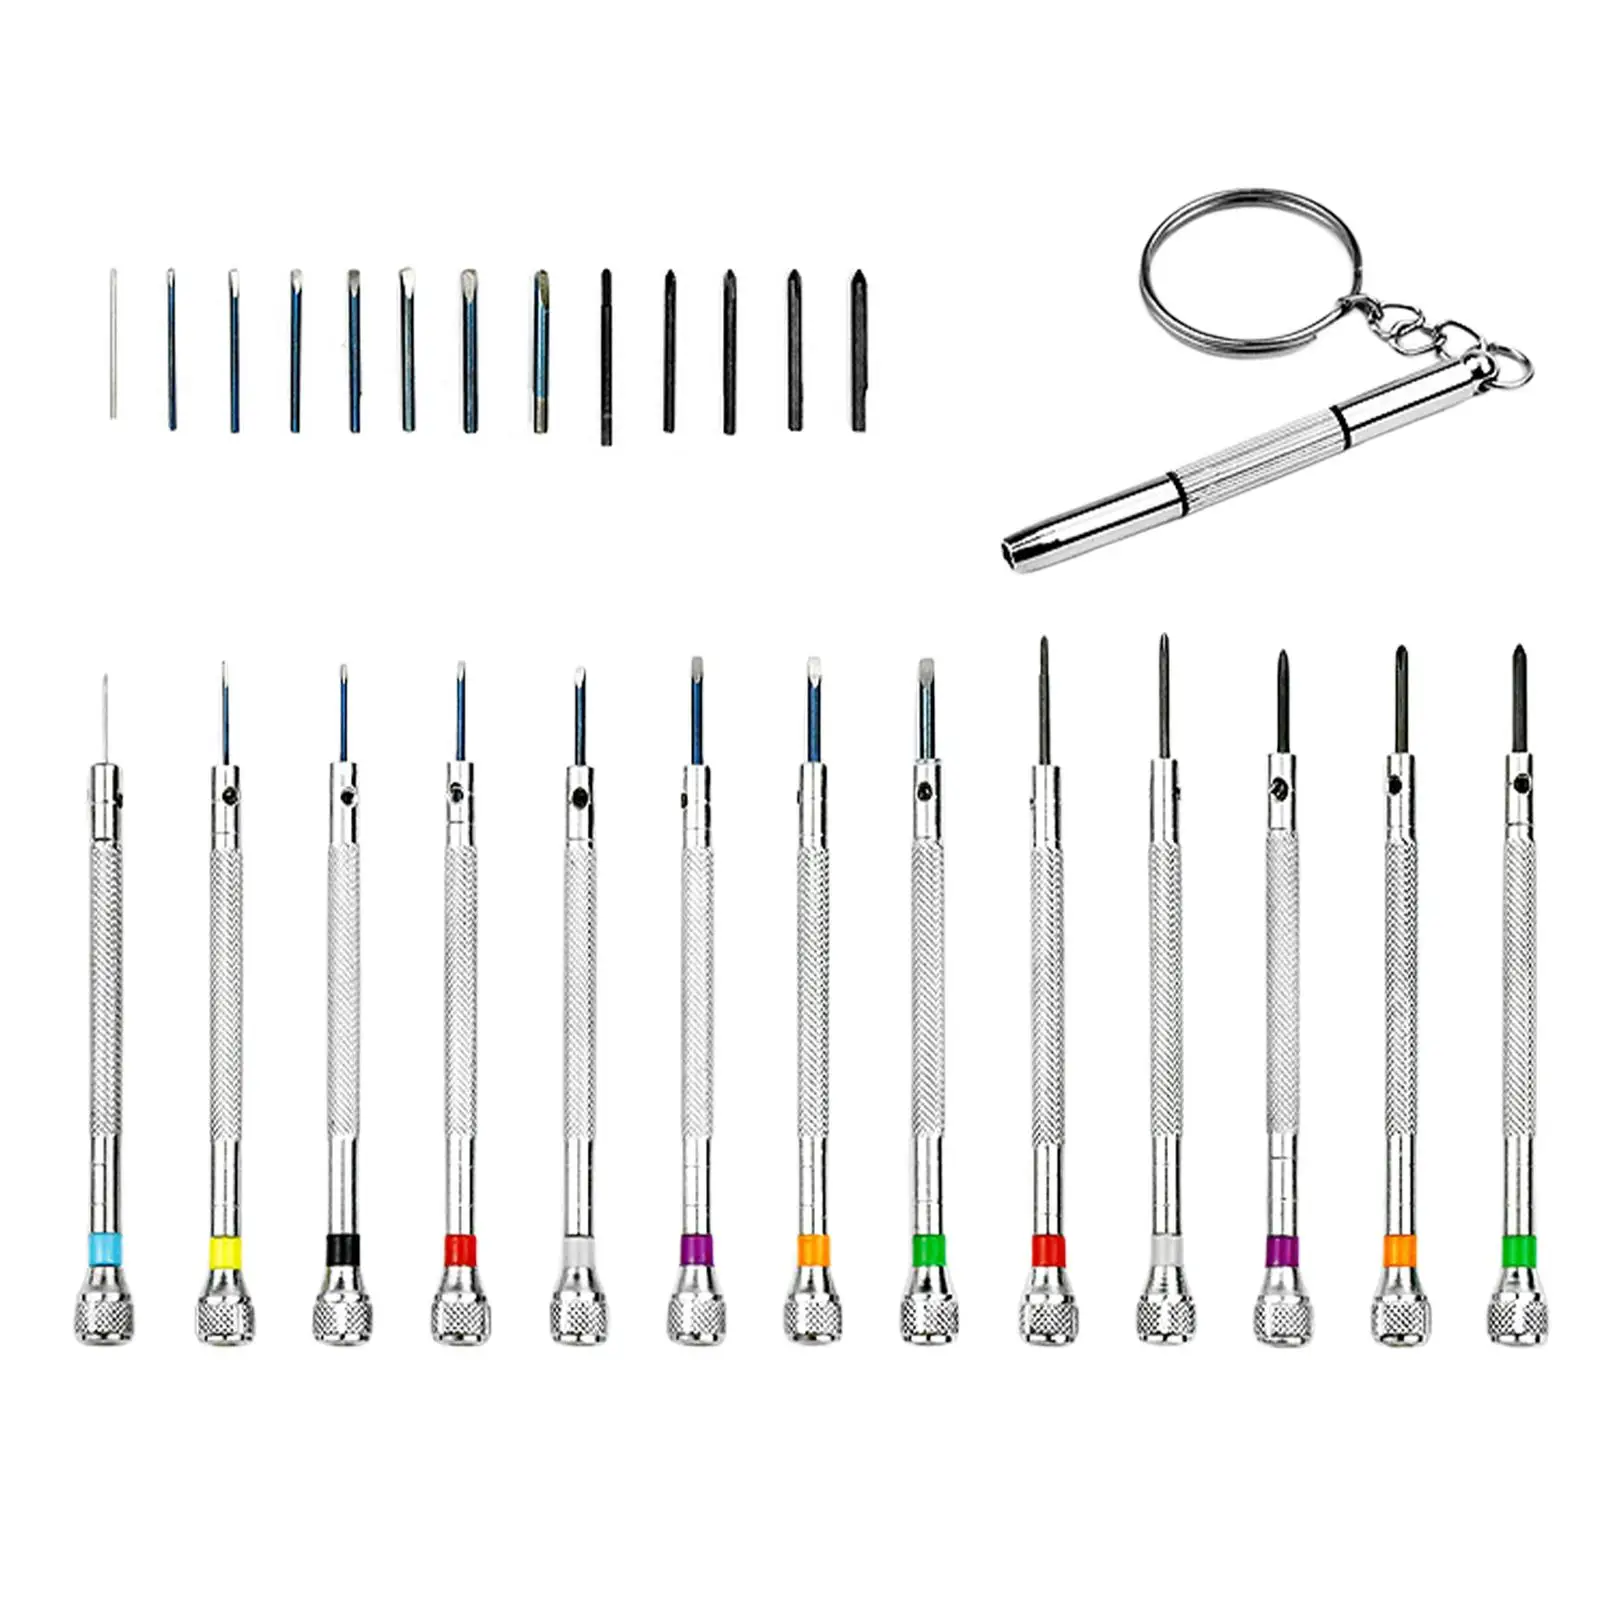 13 Pieces Watch Repair Screwdriver Set Small Premium Multifunction Sturdy for Watch Smartphone Electronices Glasses Repair Tool